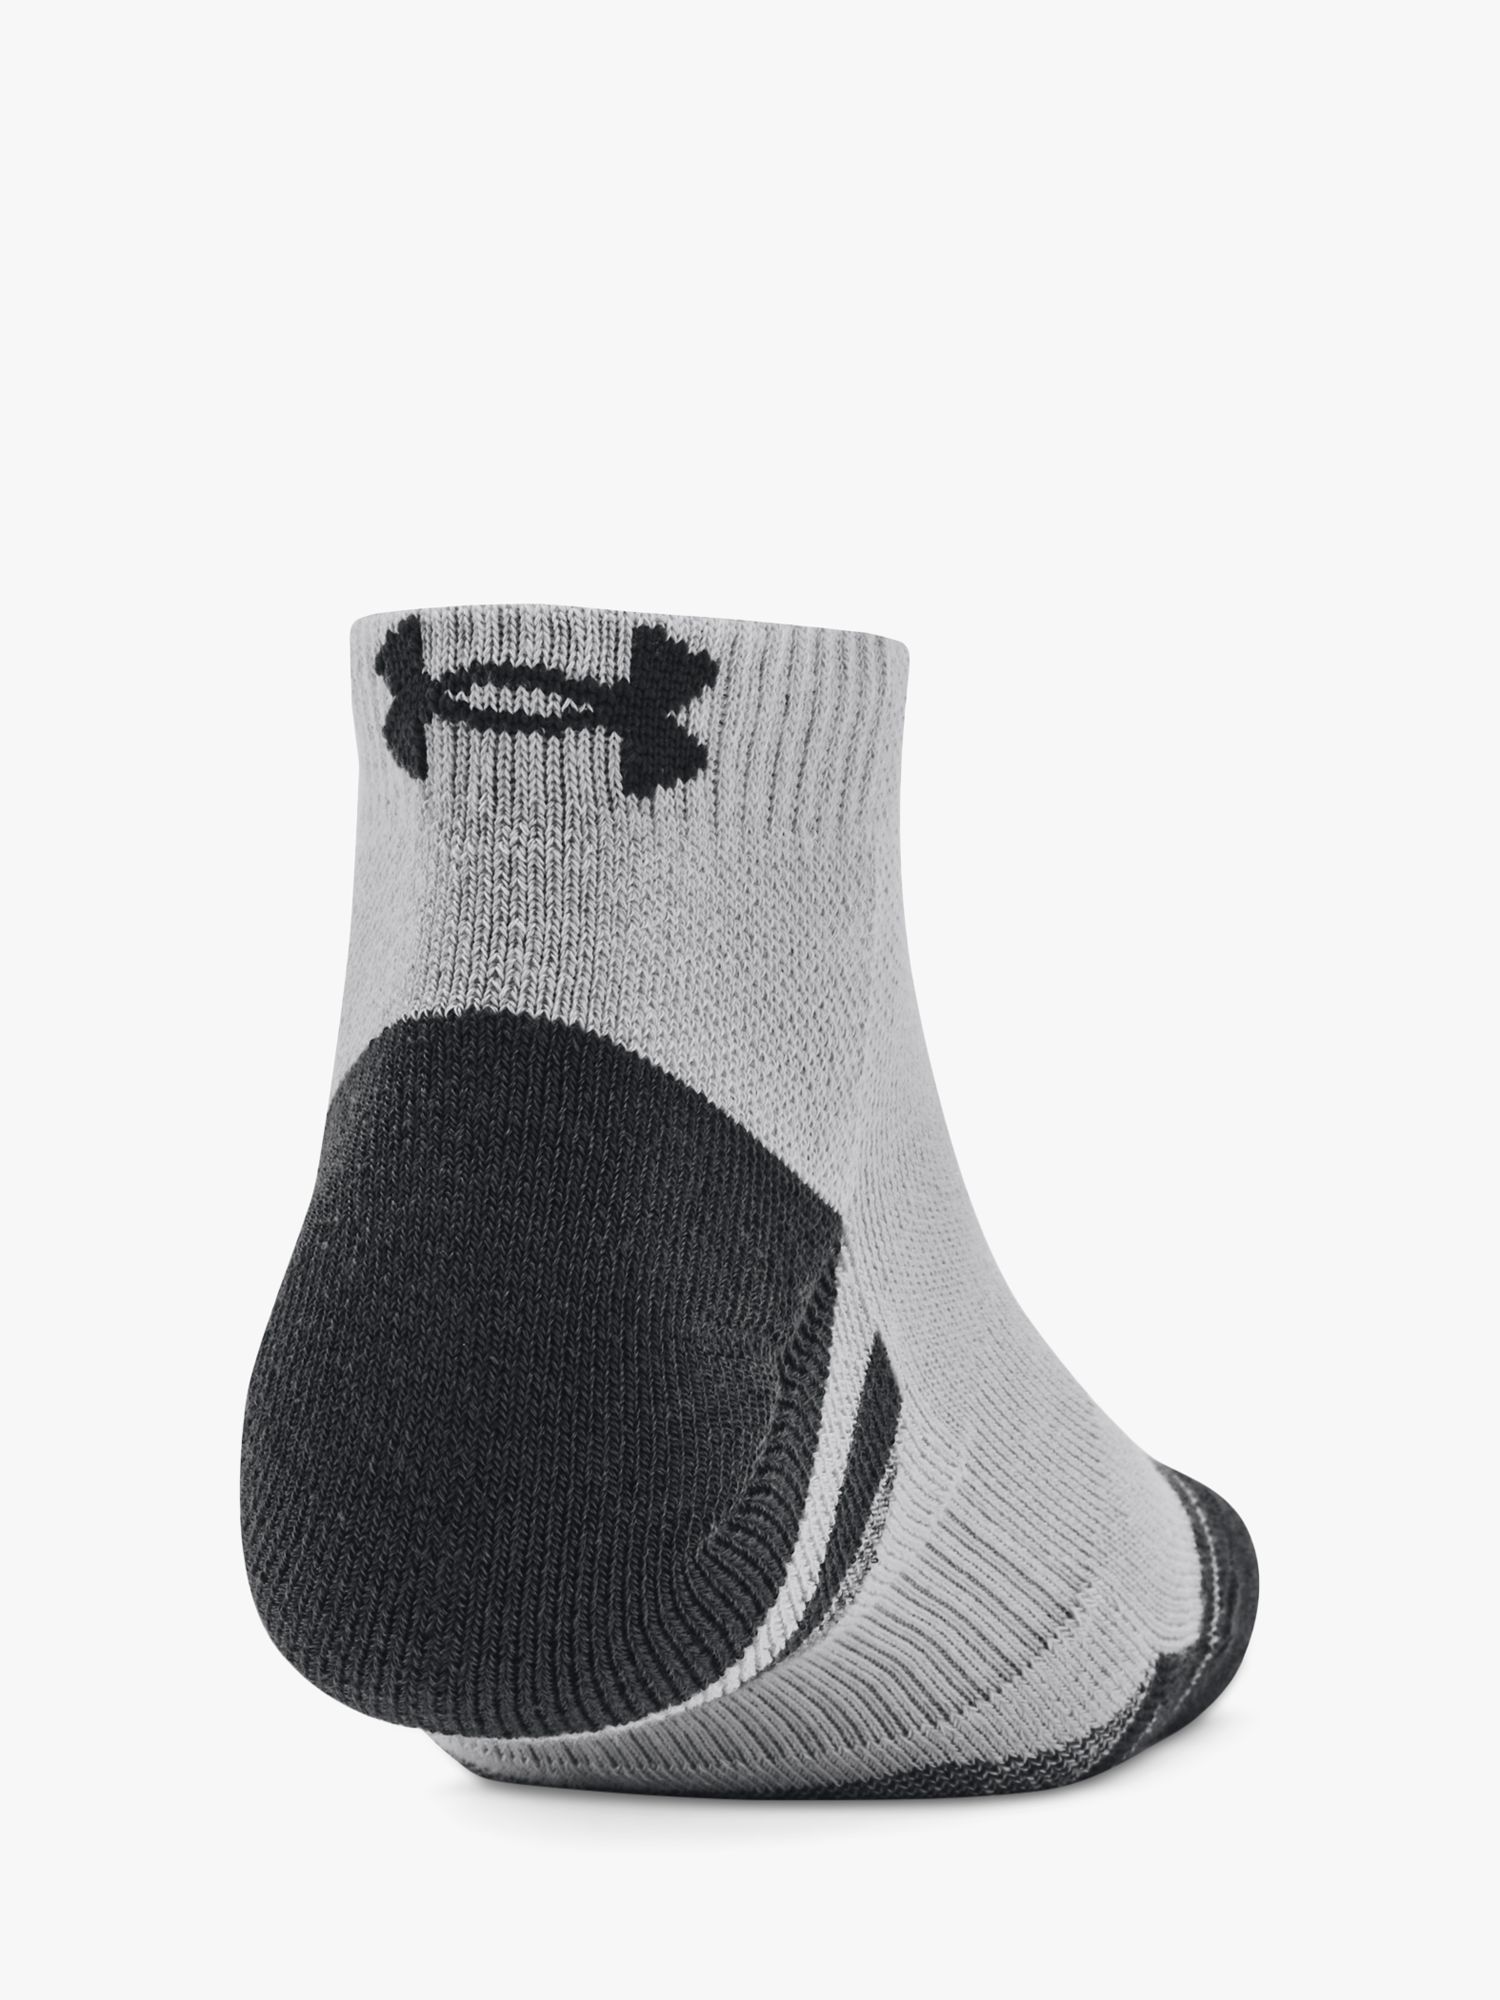 Under Armour Performance Tech Low Cut Socks, Pack of 3, Mod Gray/White/Jet Gray, M